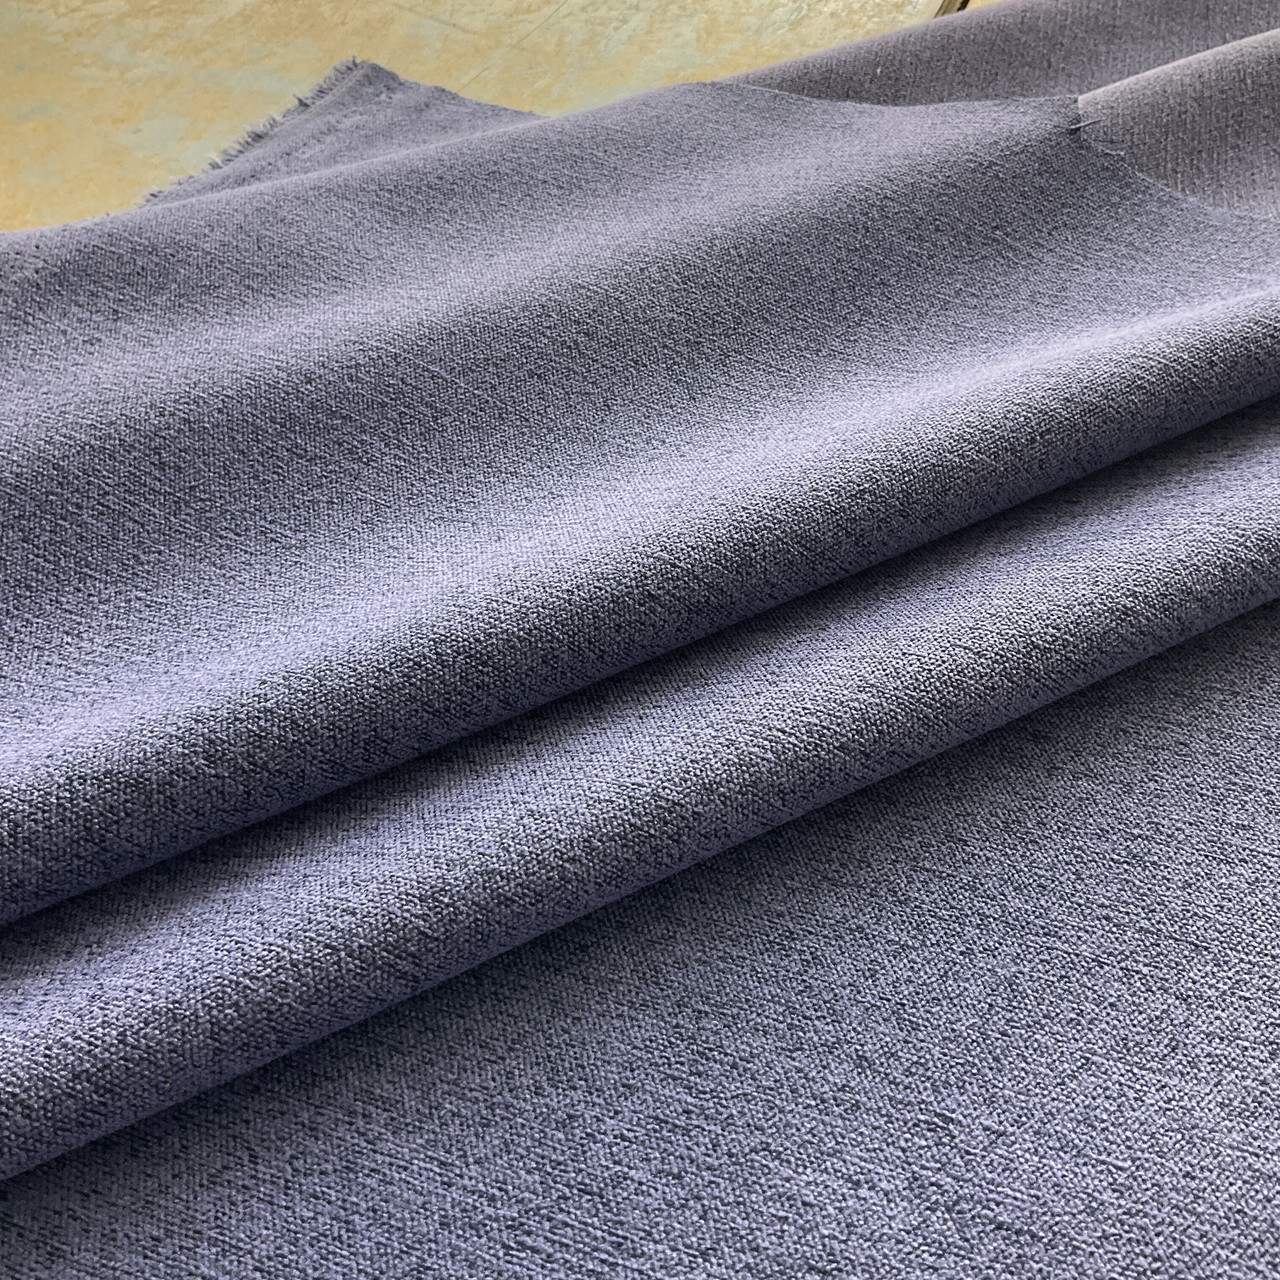 Mottled Blue-Grey Microfiber Fabric | Upholstery | Heavy Weight | 54 Wide  | By the Yard